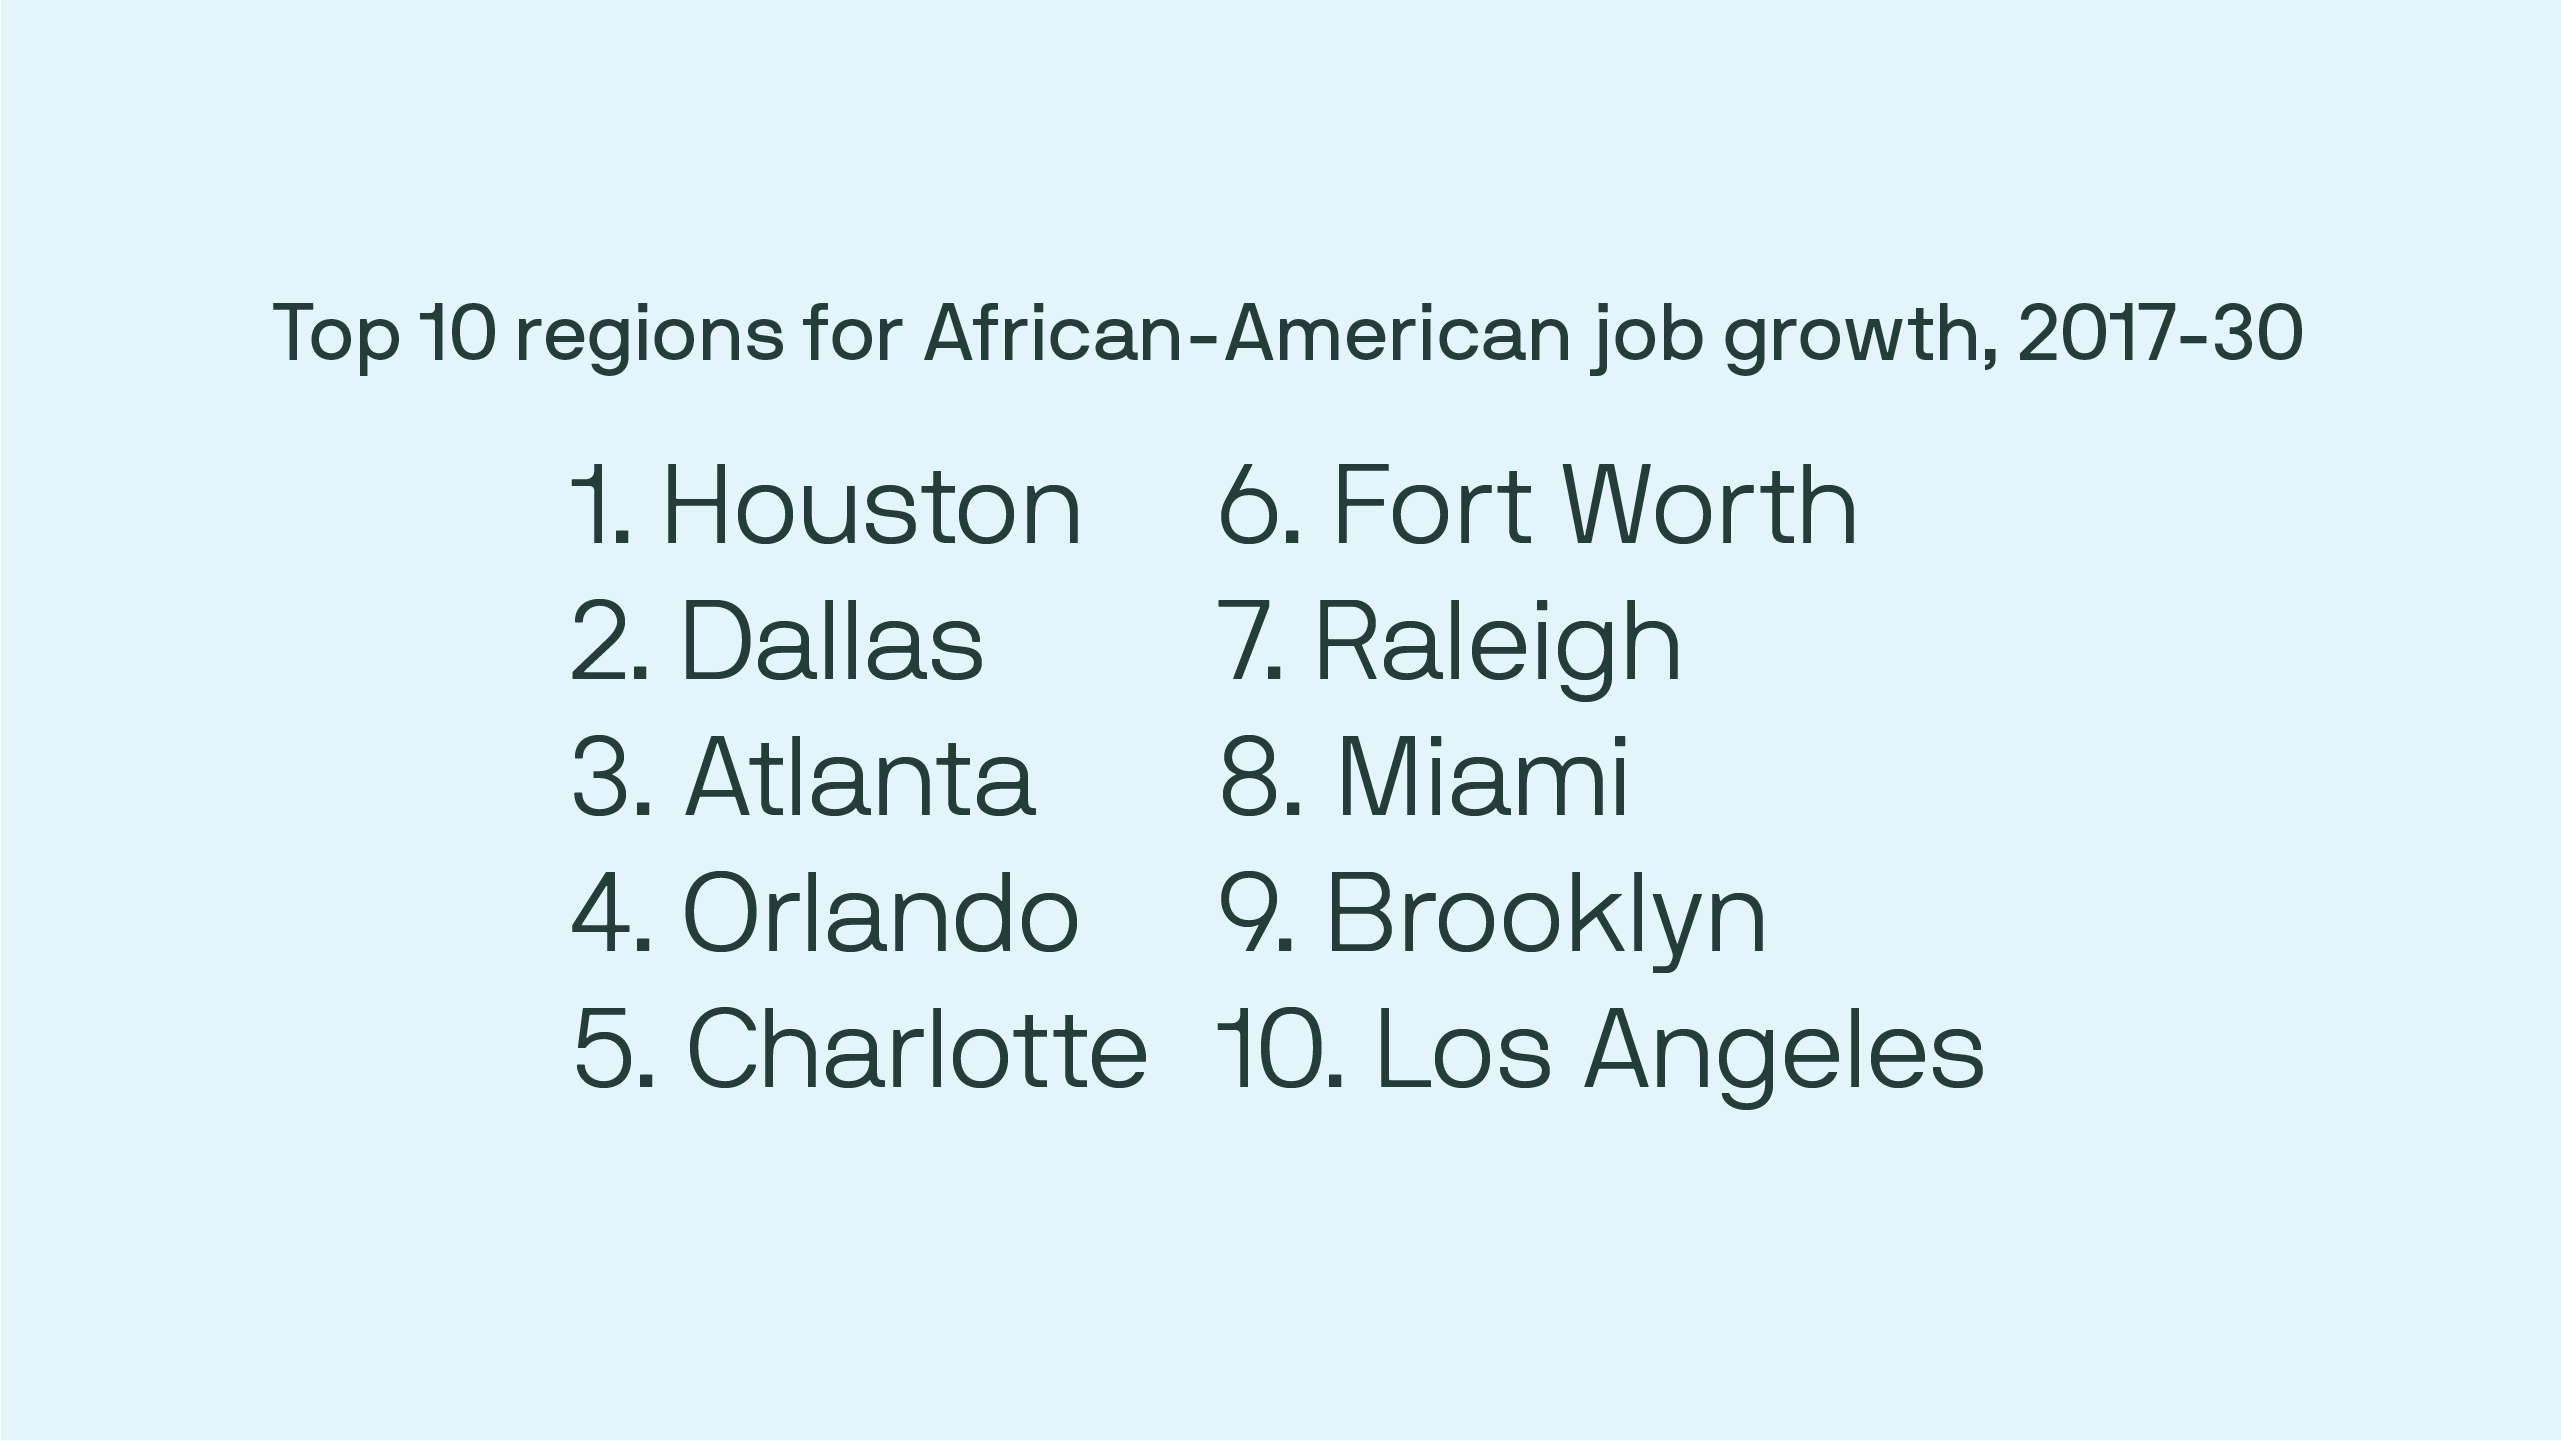 List of top 10 regions for African-American job growth